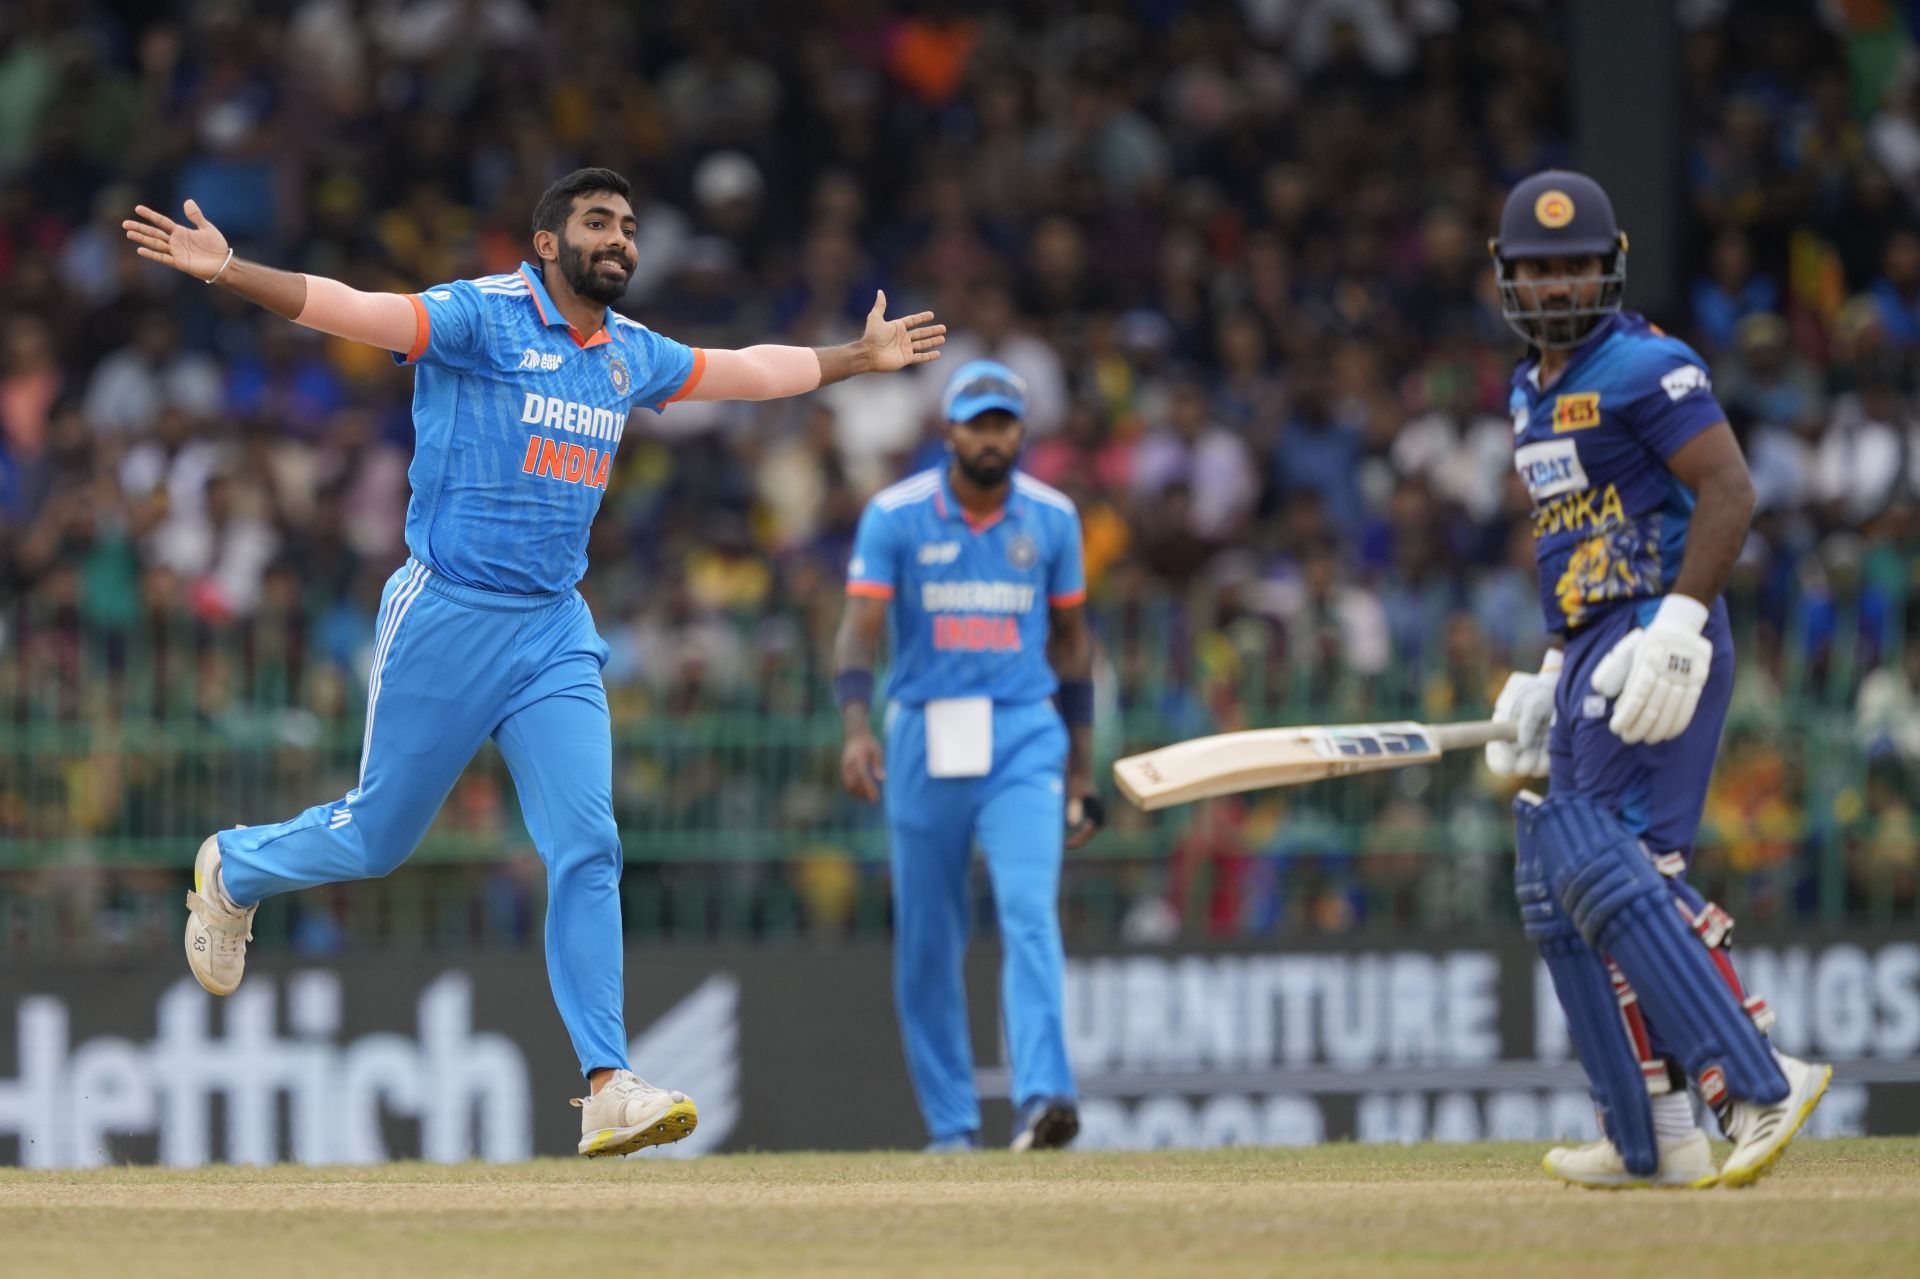 Jasprit Bumrah will likely be rotated over the course of the ODI series